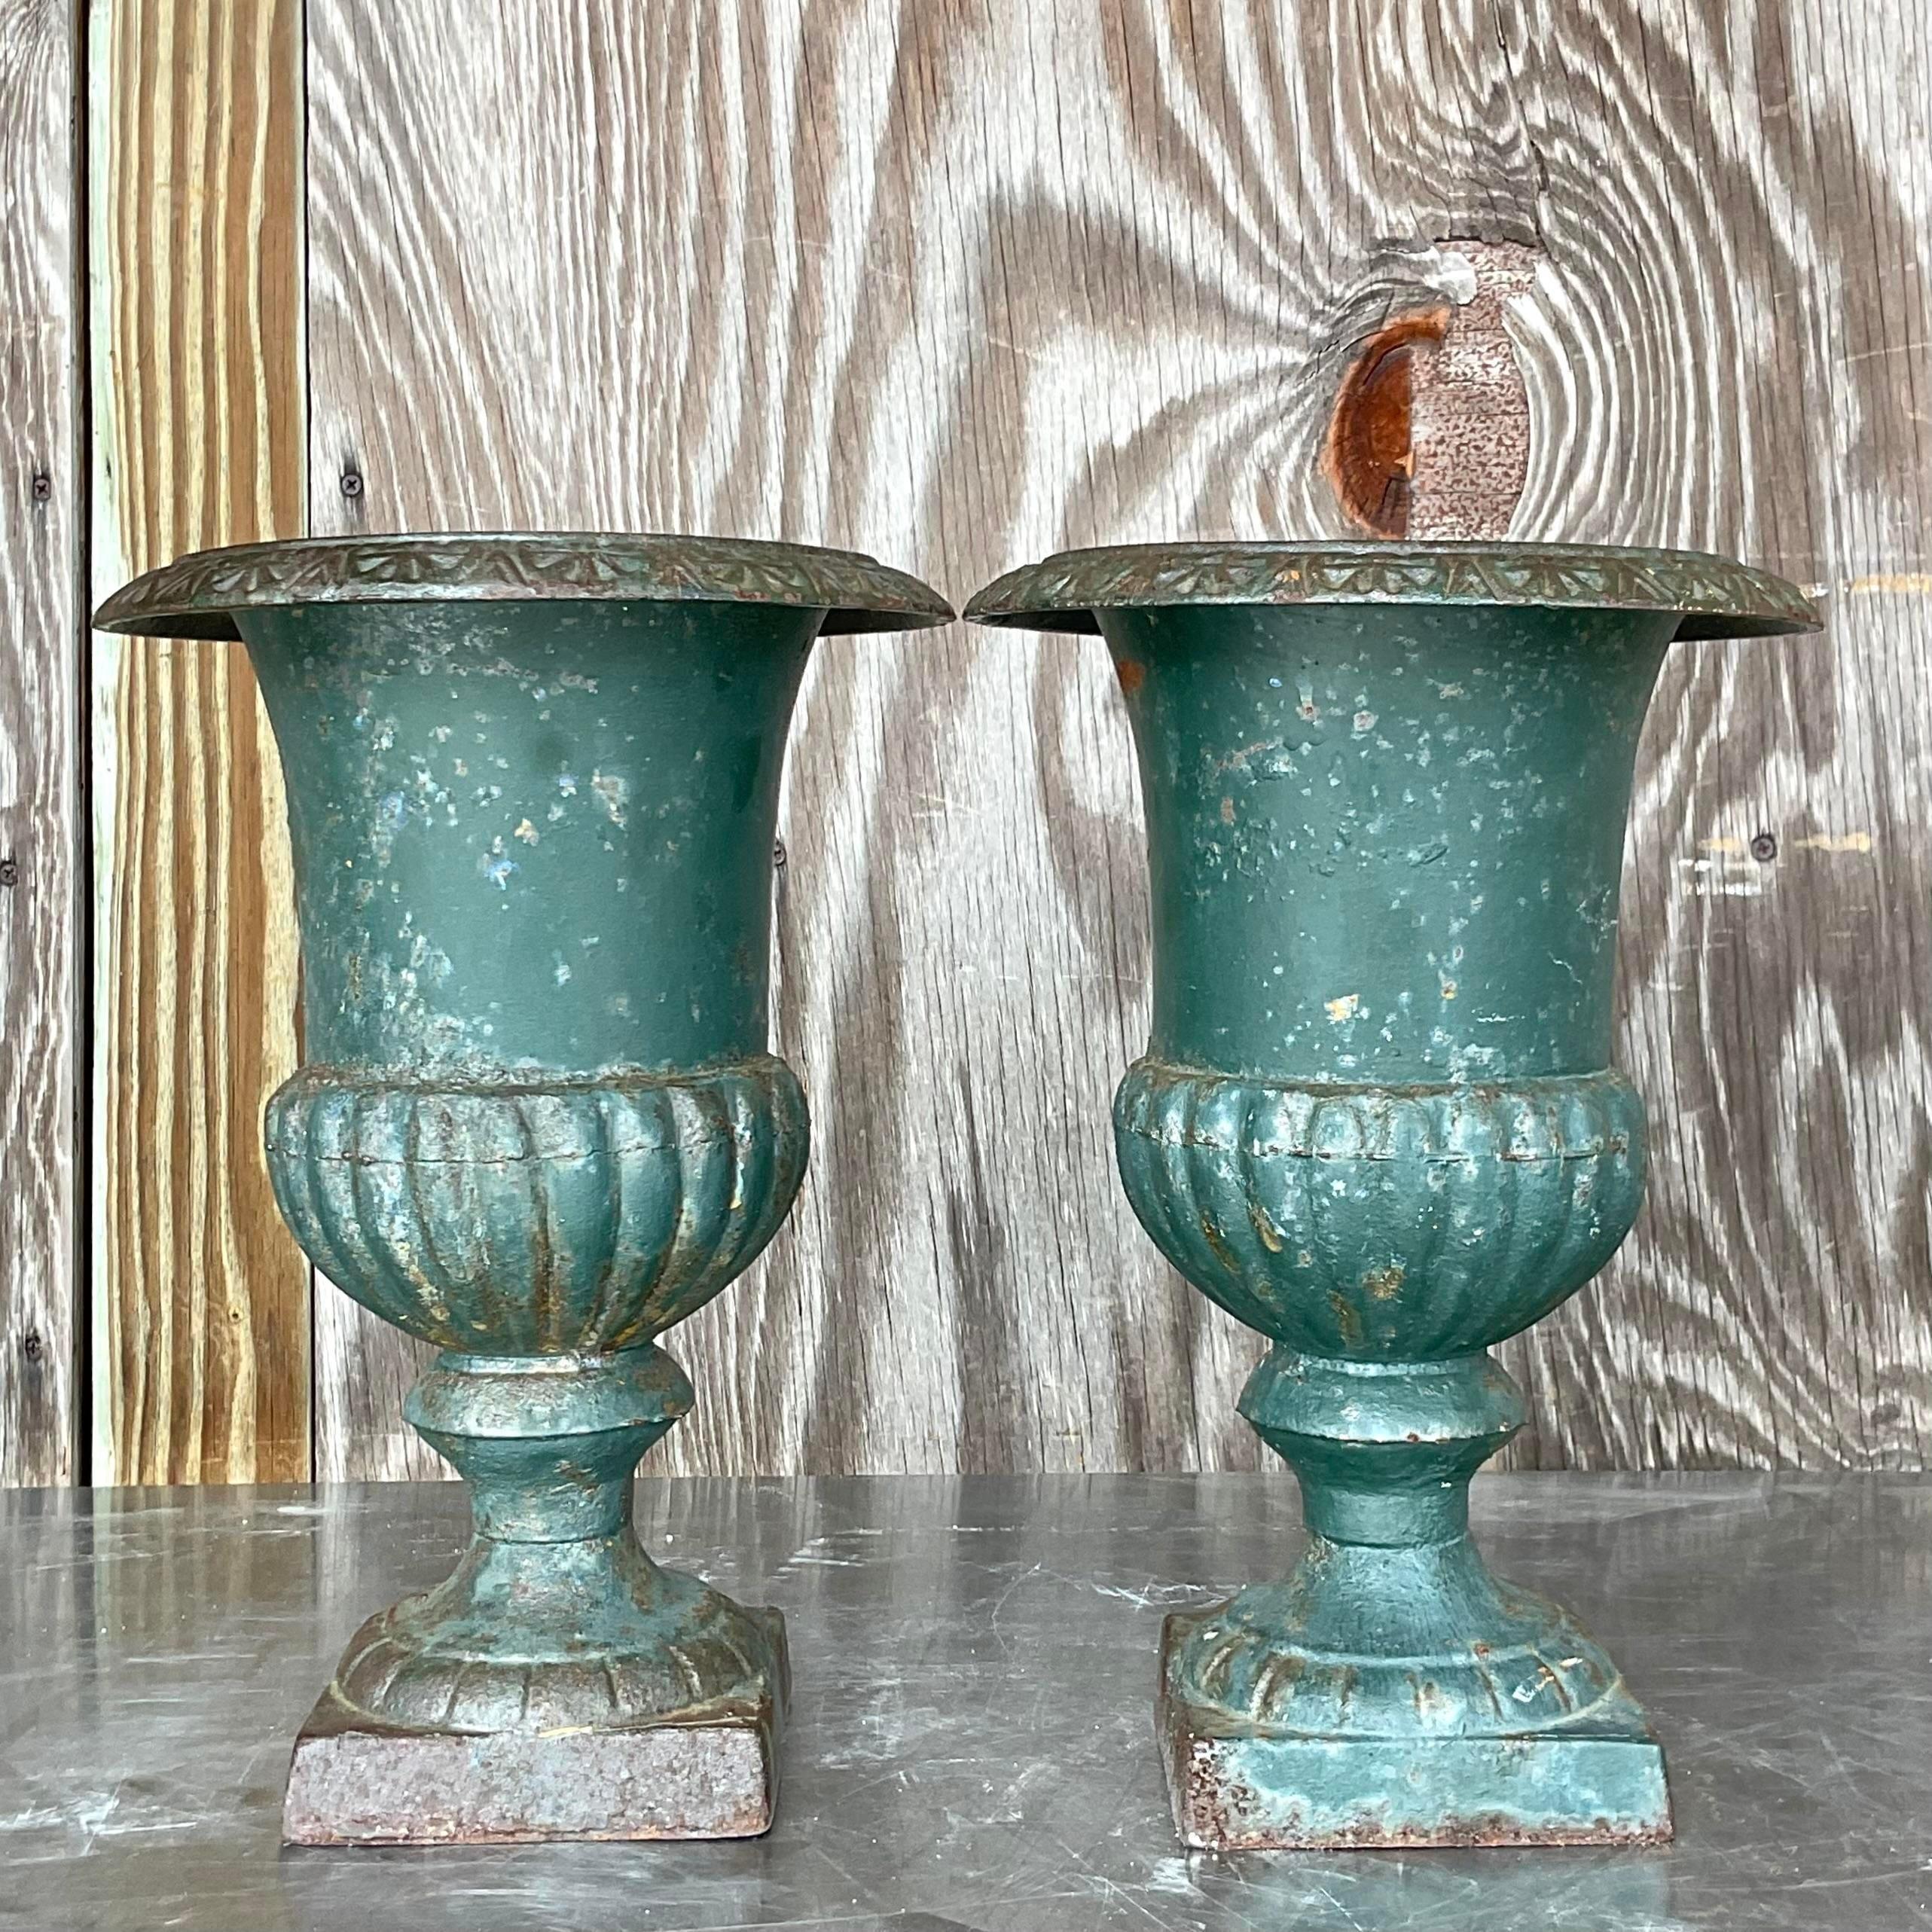 20th Century Vintage Boho Patinated Wrought Iron Urns - a Pair For Sale